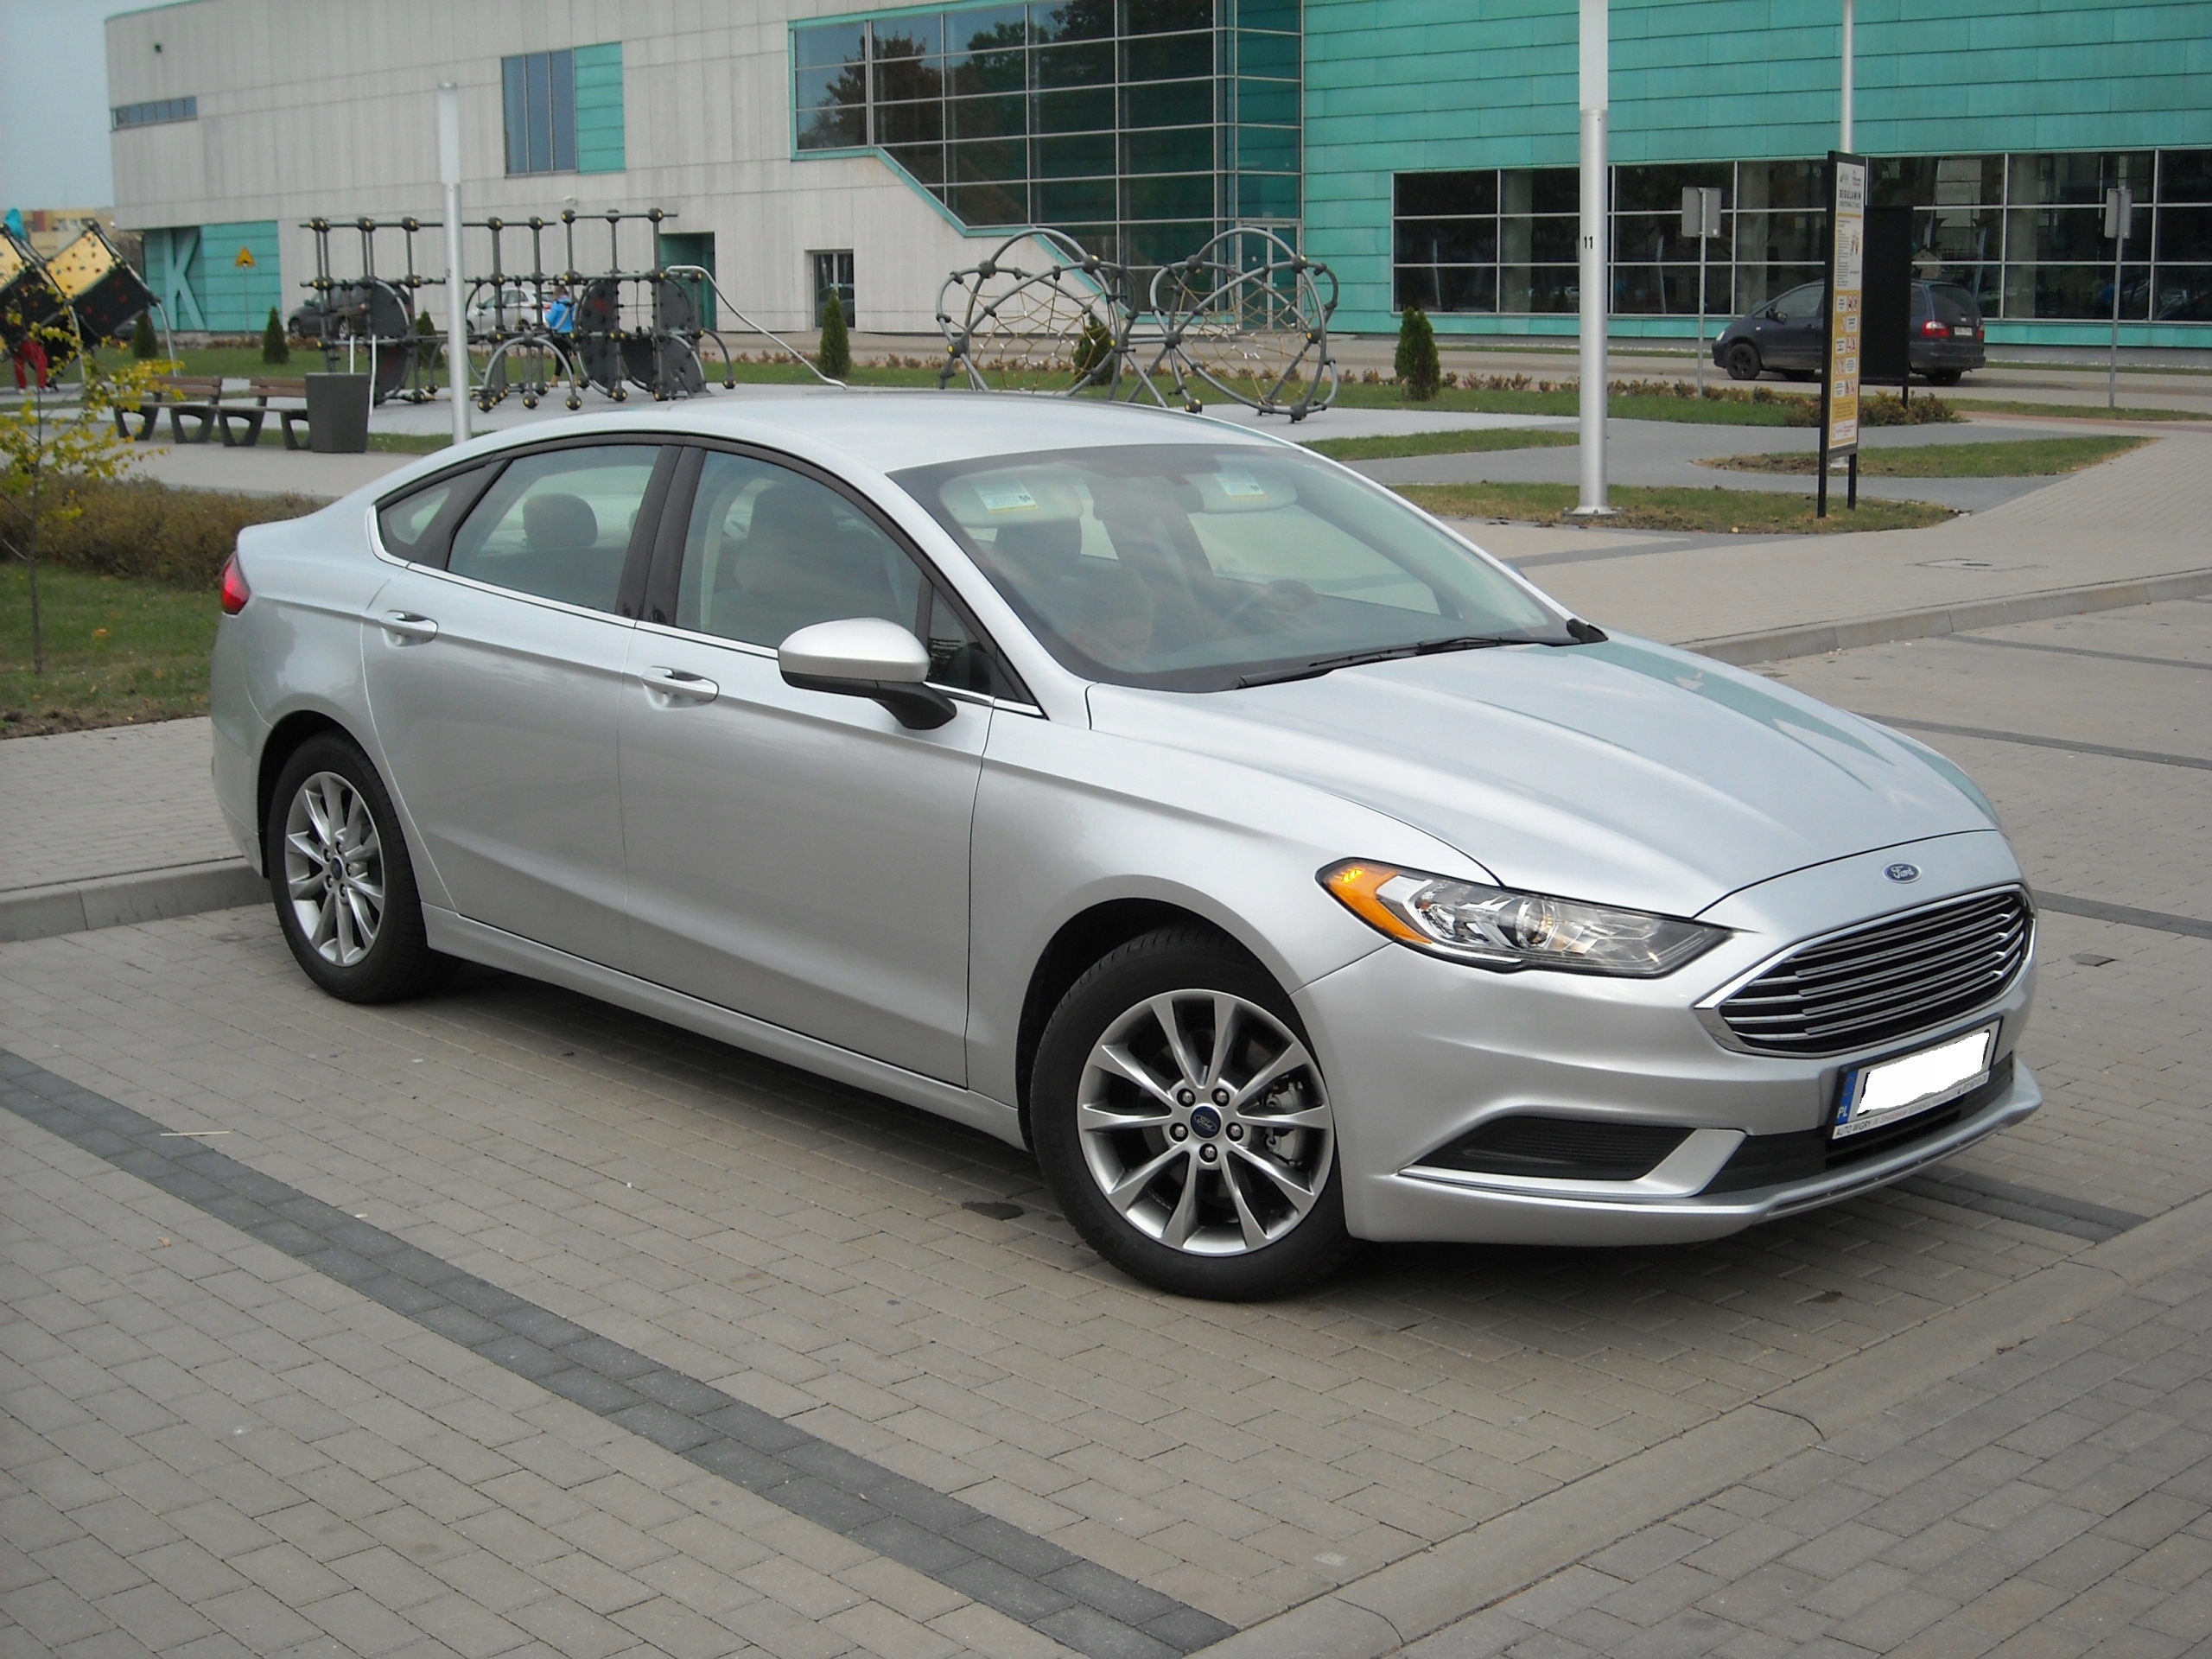 Ford FUSION LIFT mondeo MK5 2017 ecoboost 5000 km